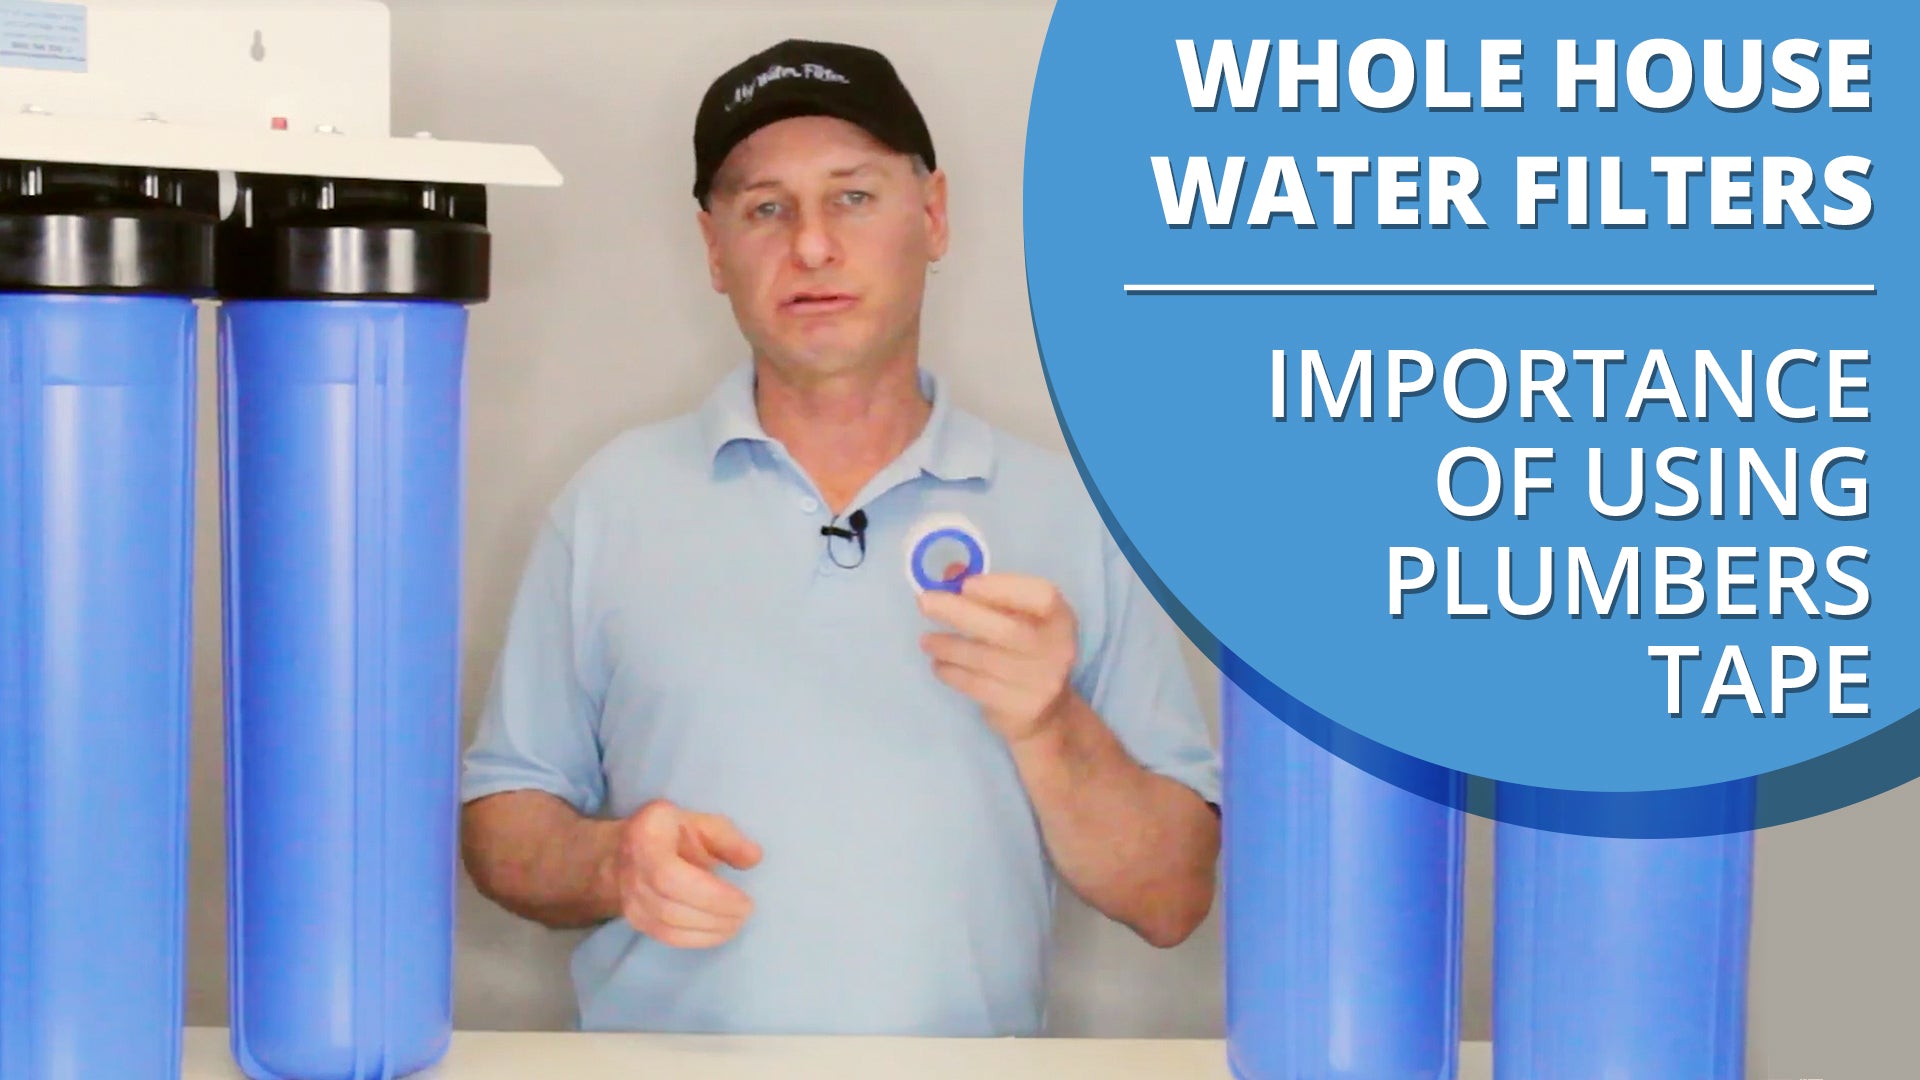 [VIDEO] The Importance of using plumbers tape specifically for whole house water filters